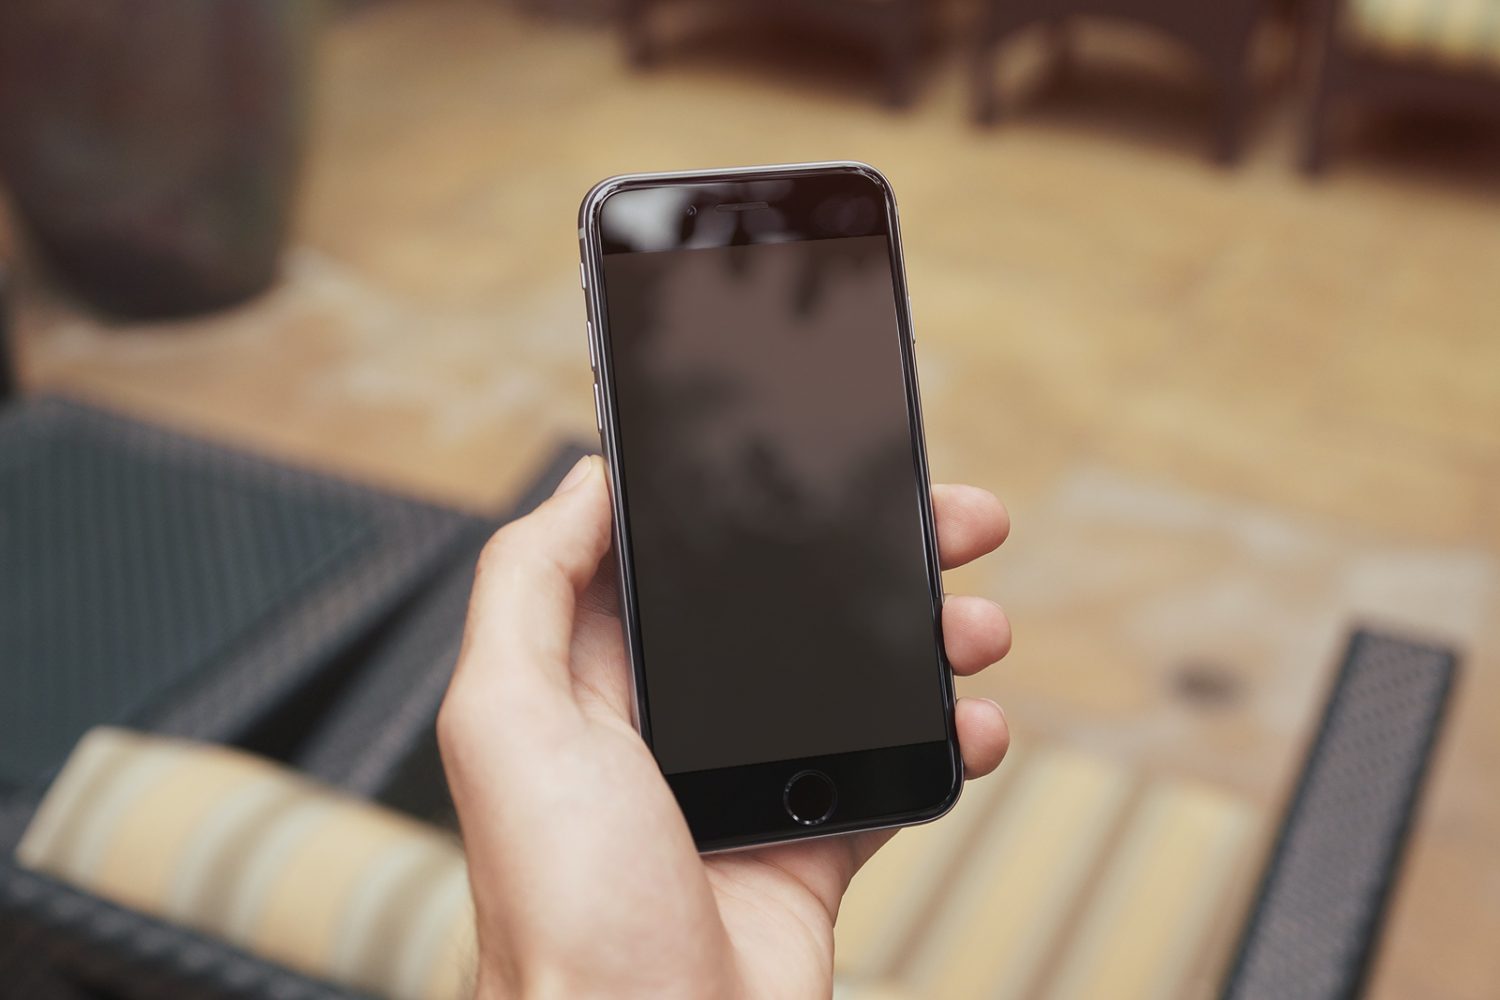 iPhone 6 Plus In Woman's Hand Mockup